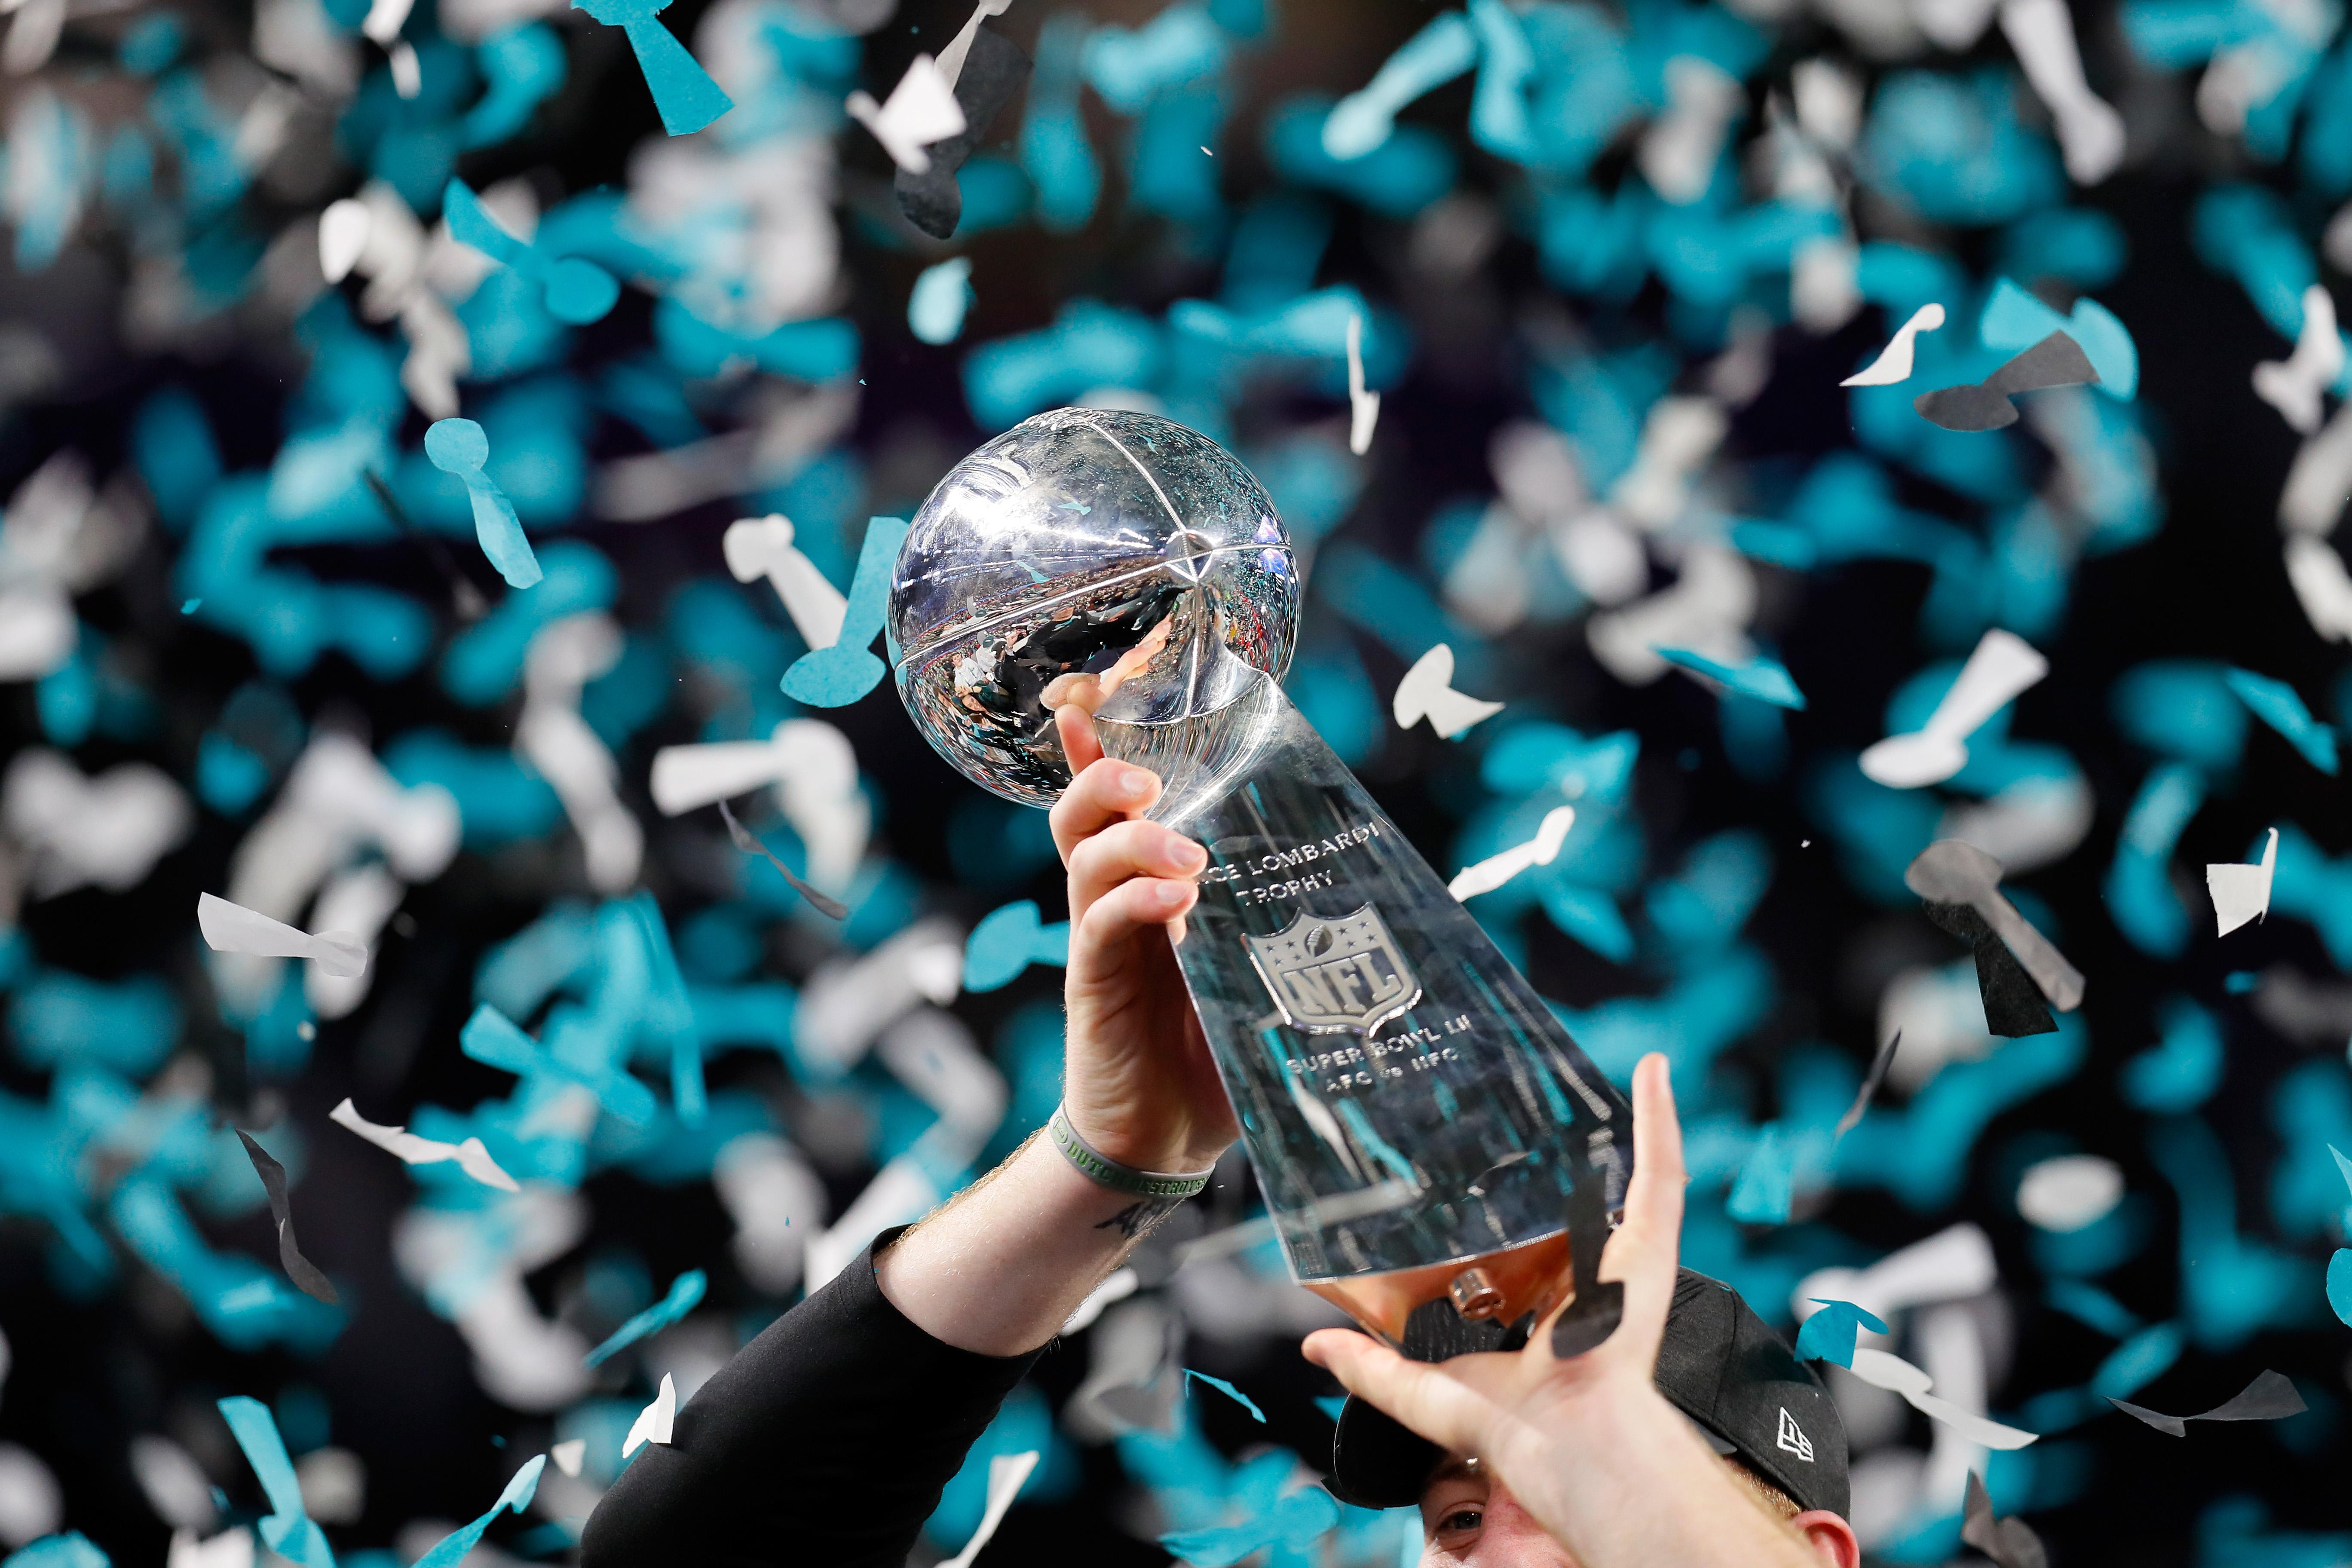 The Vince Lombardi Trophy is held in the air as confetti falls.